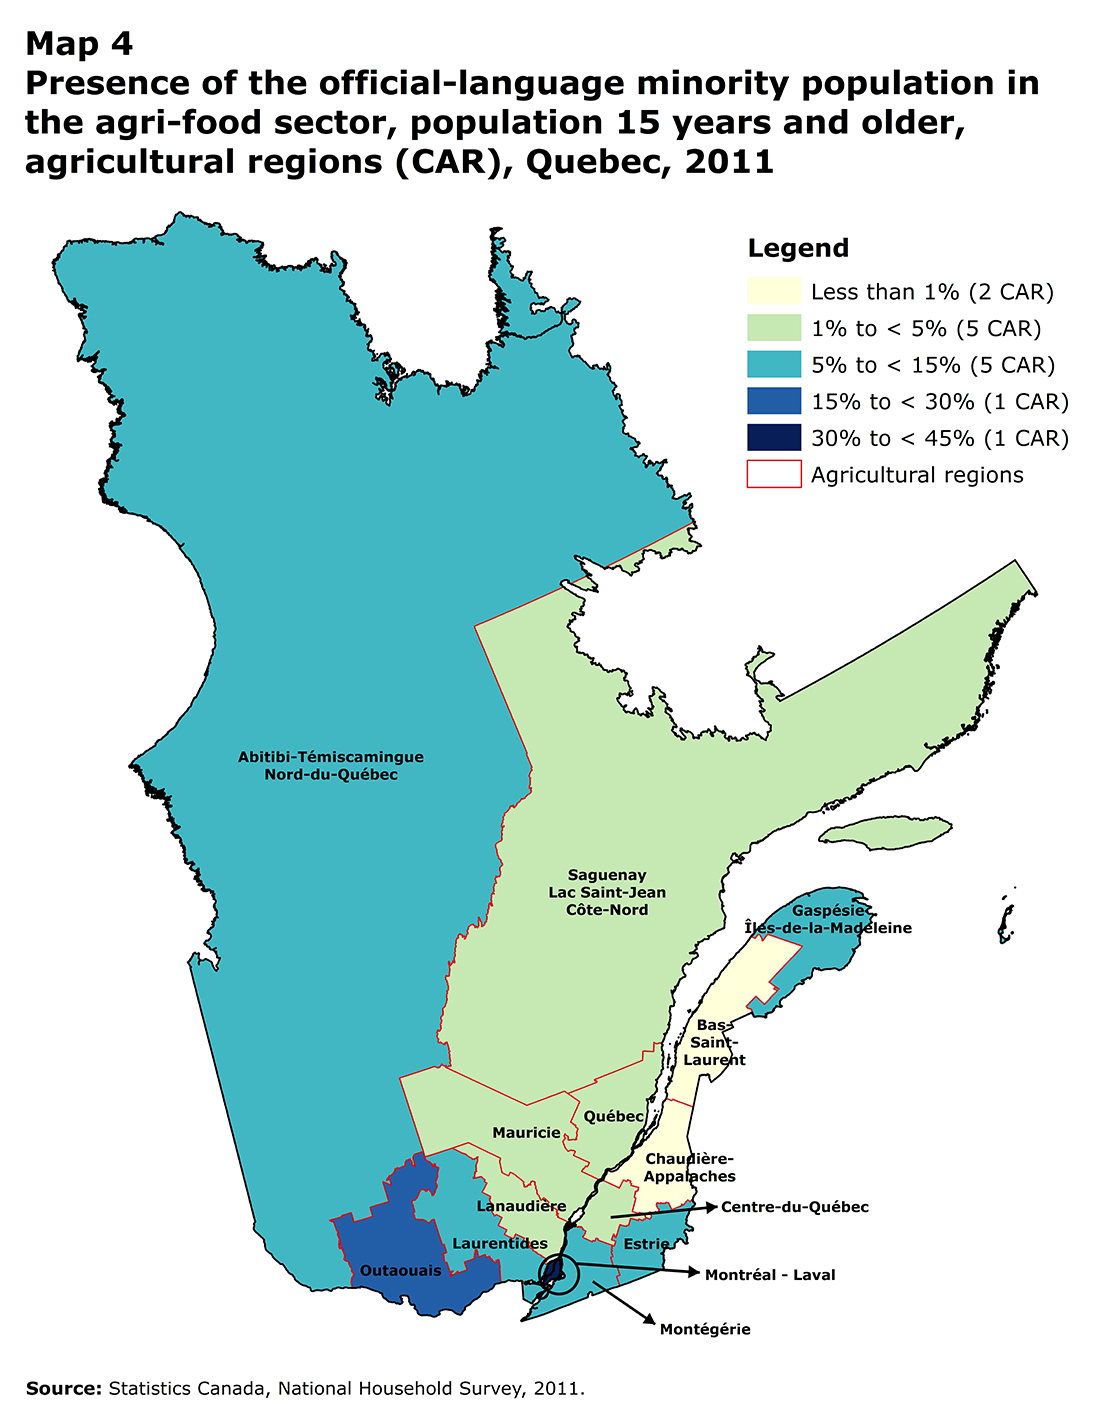 Map 4 Presence of the official-language minority population in the agri-food sector, population 15 years and older, agricultural regions (CAR), Quebec, 2011